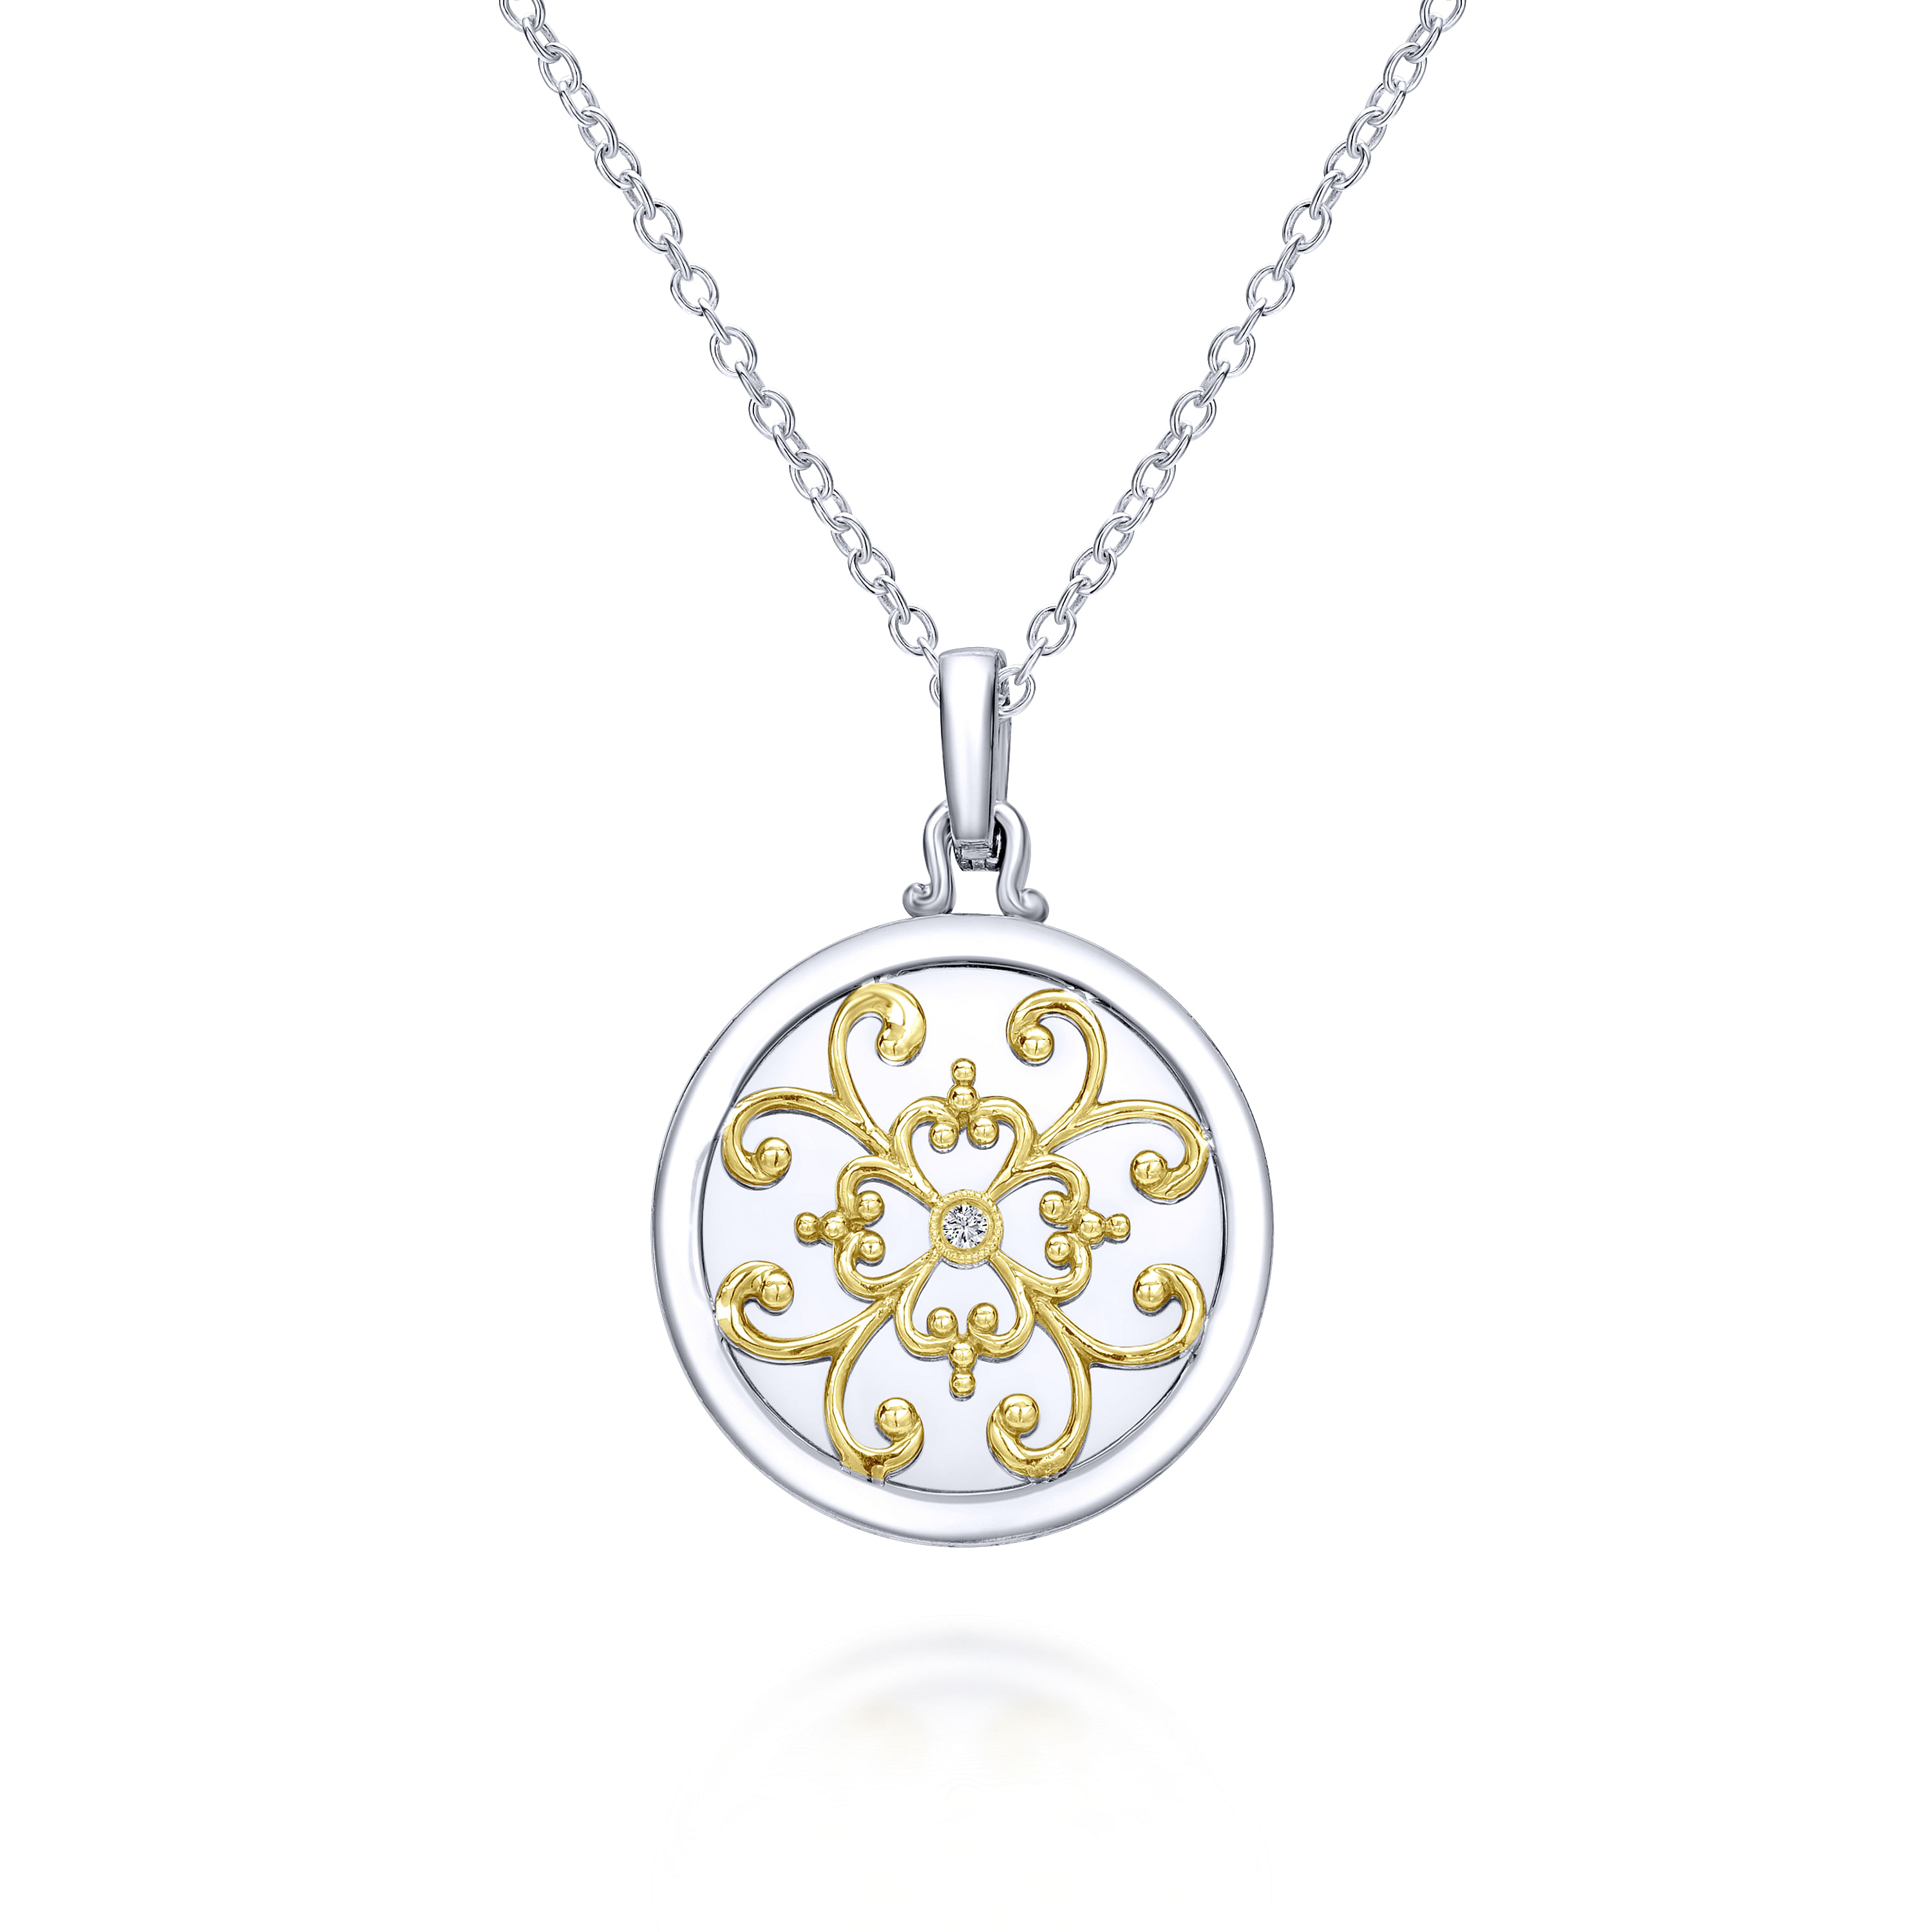 18 inch 925 Sterling Silver 18K Yellow Gold Round Filigree Diamond Pendant Necklace